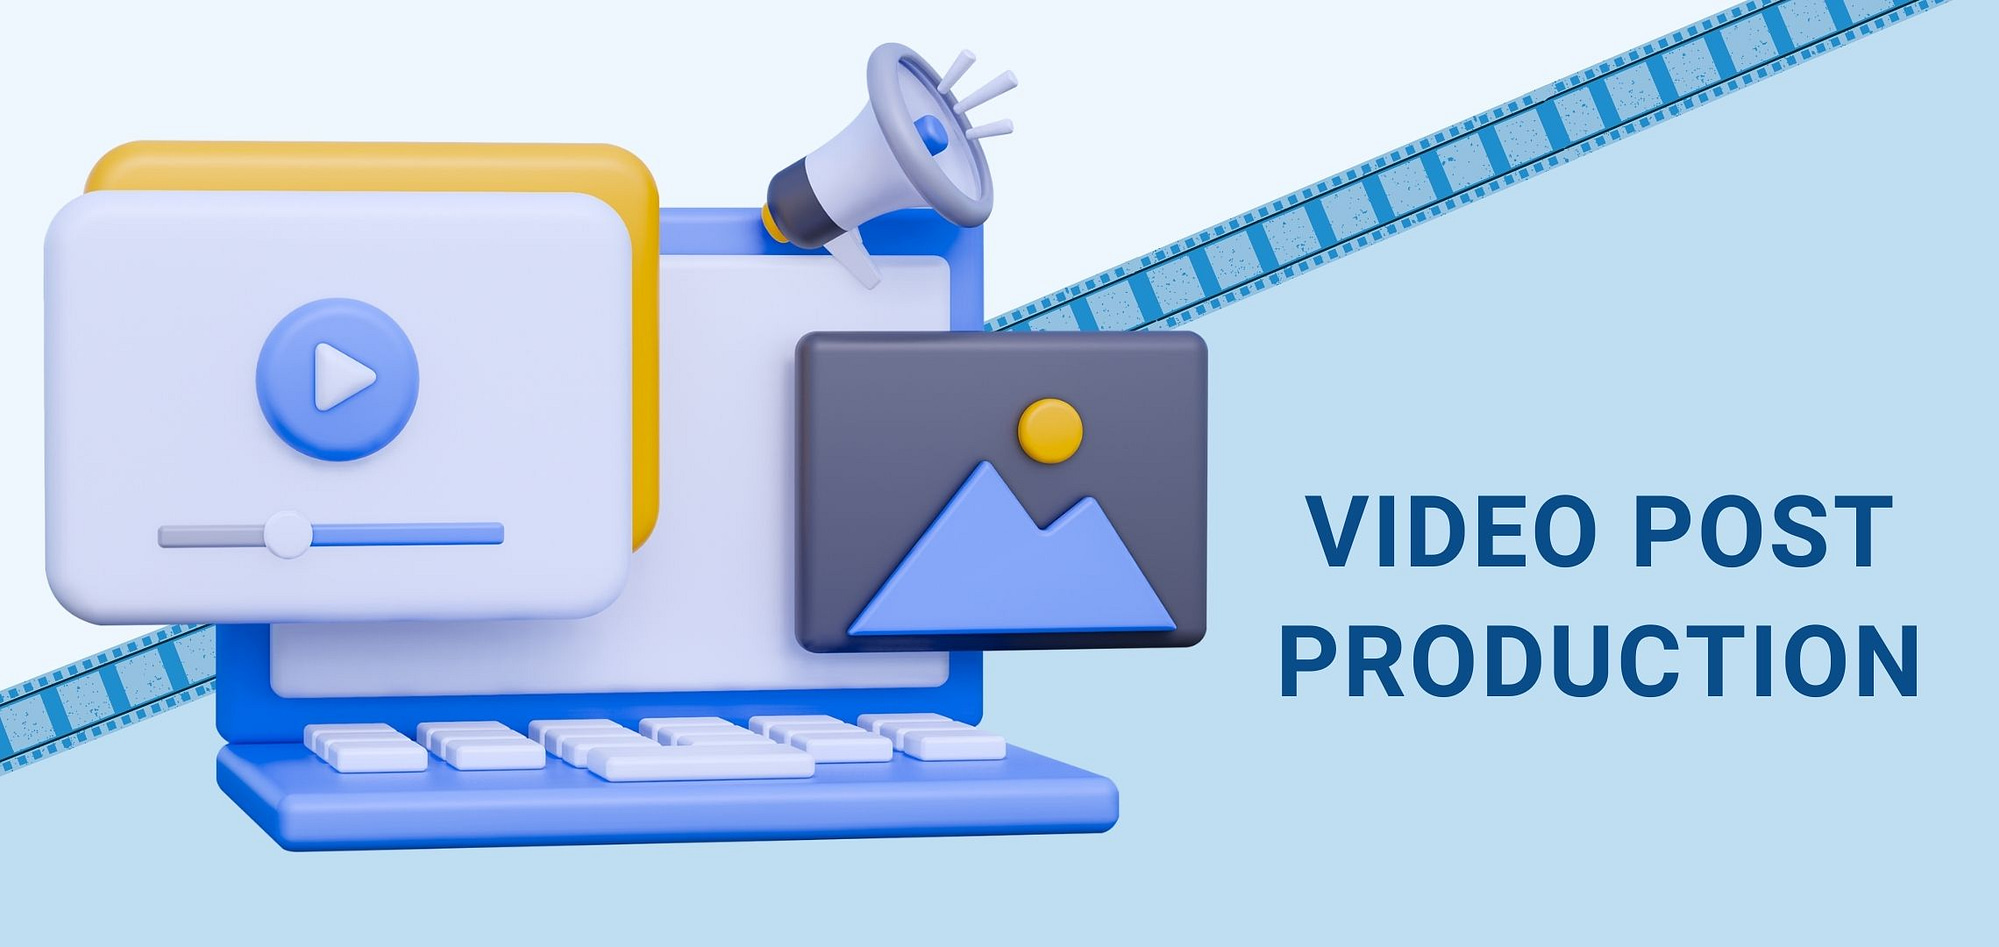 Video Post Production